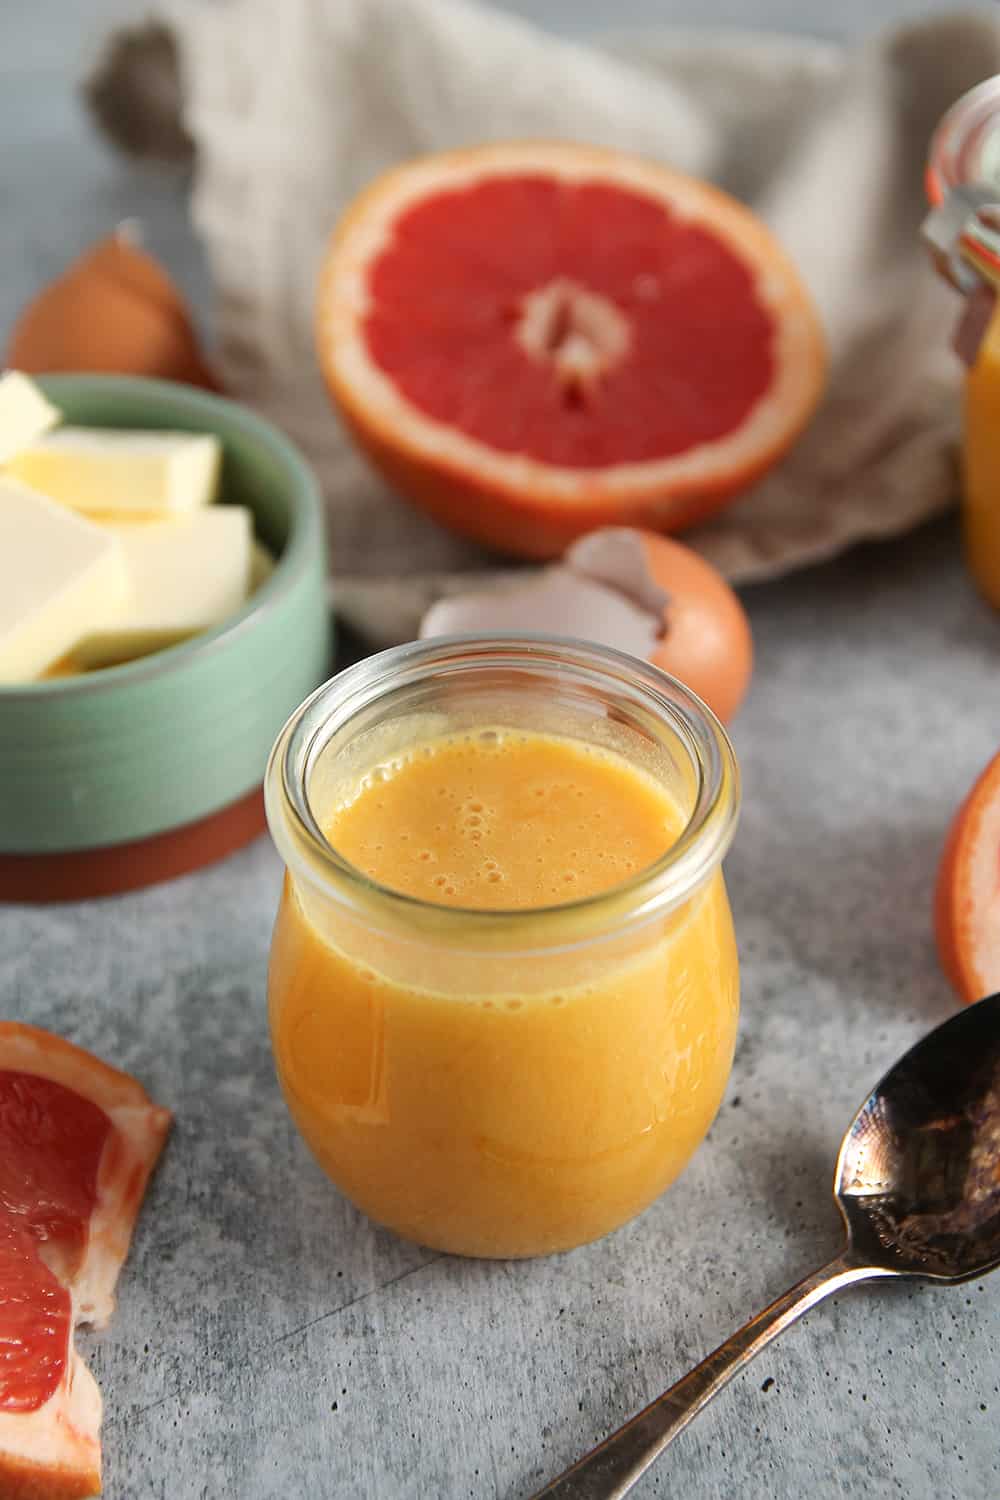 Make Grapefruit Curd with just a few ingredients for a bright, tangy citrus curd.